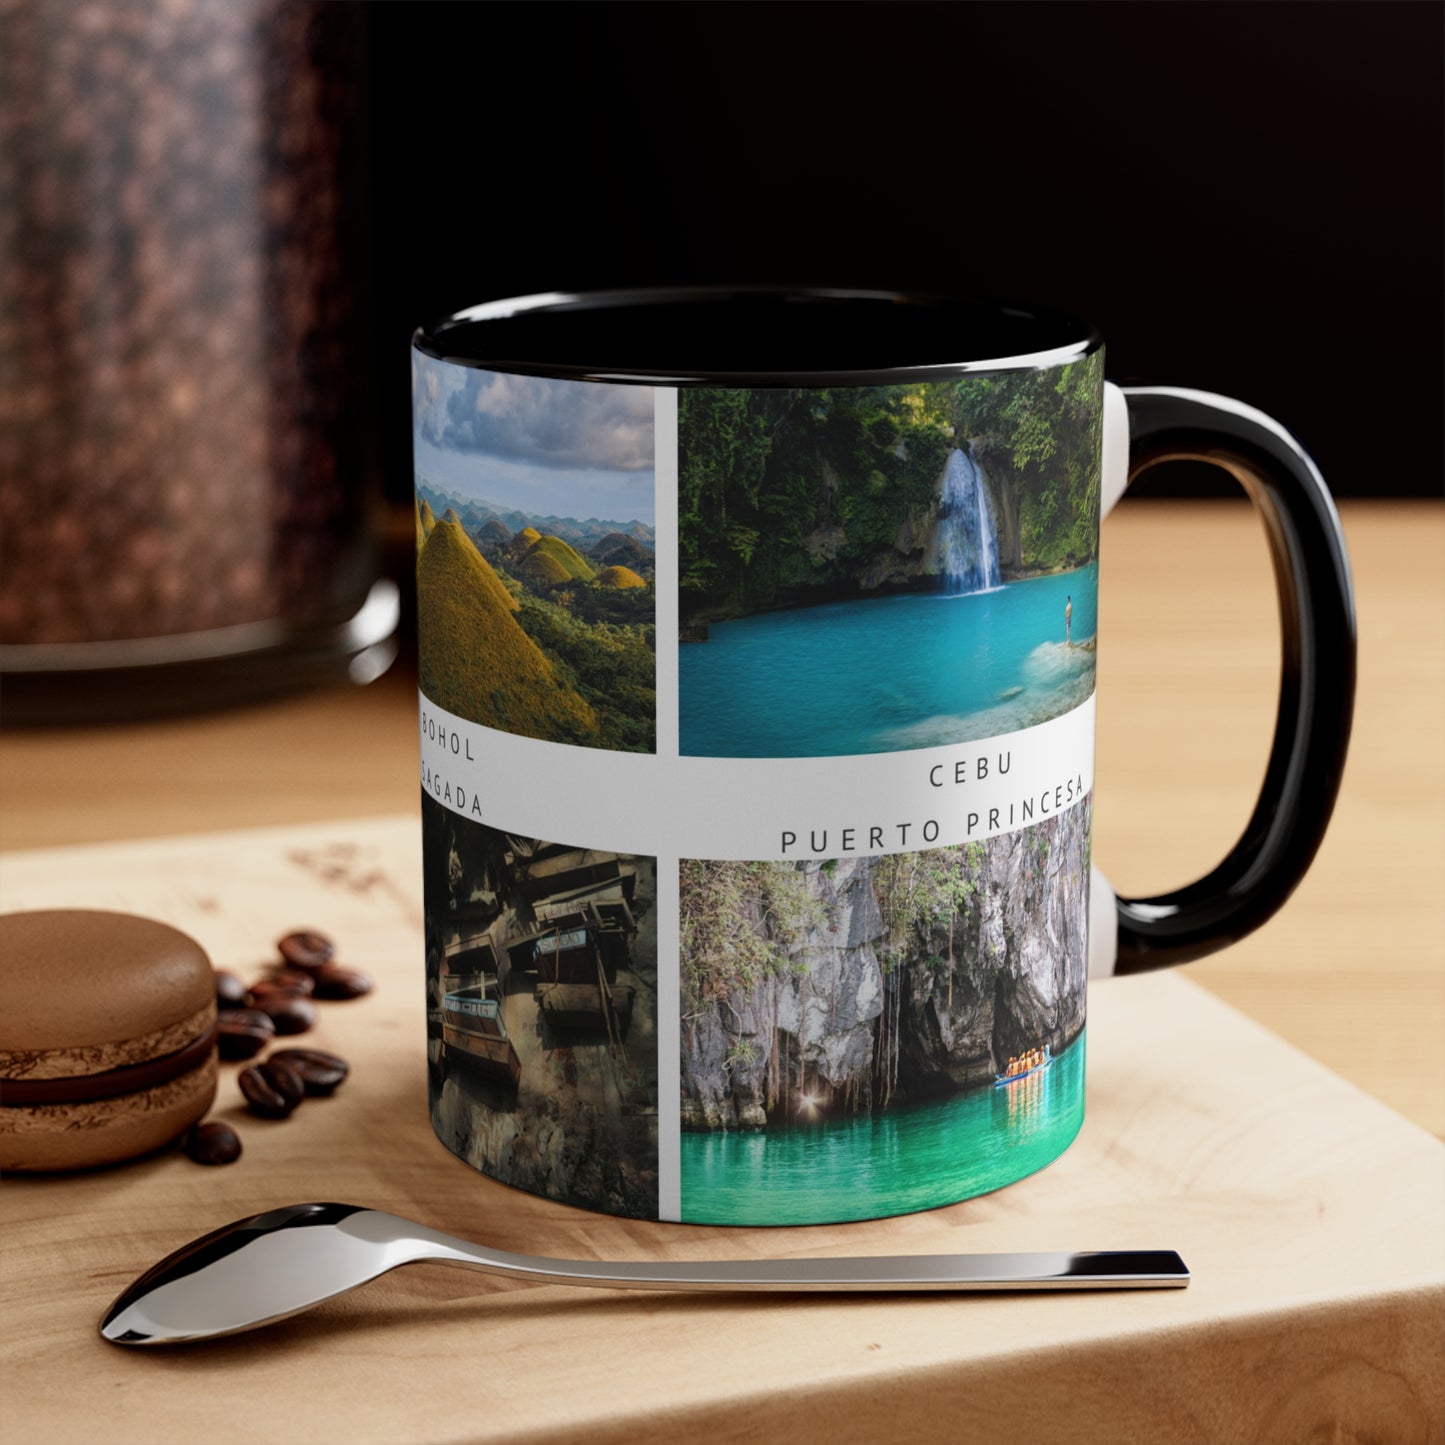 Philippines! This Travel Accent Coffee Mug is a part of a Travel Series for you to choose from. 11oz. Great as a gift or get one to enjoy yourself.